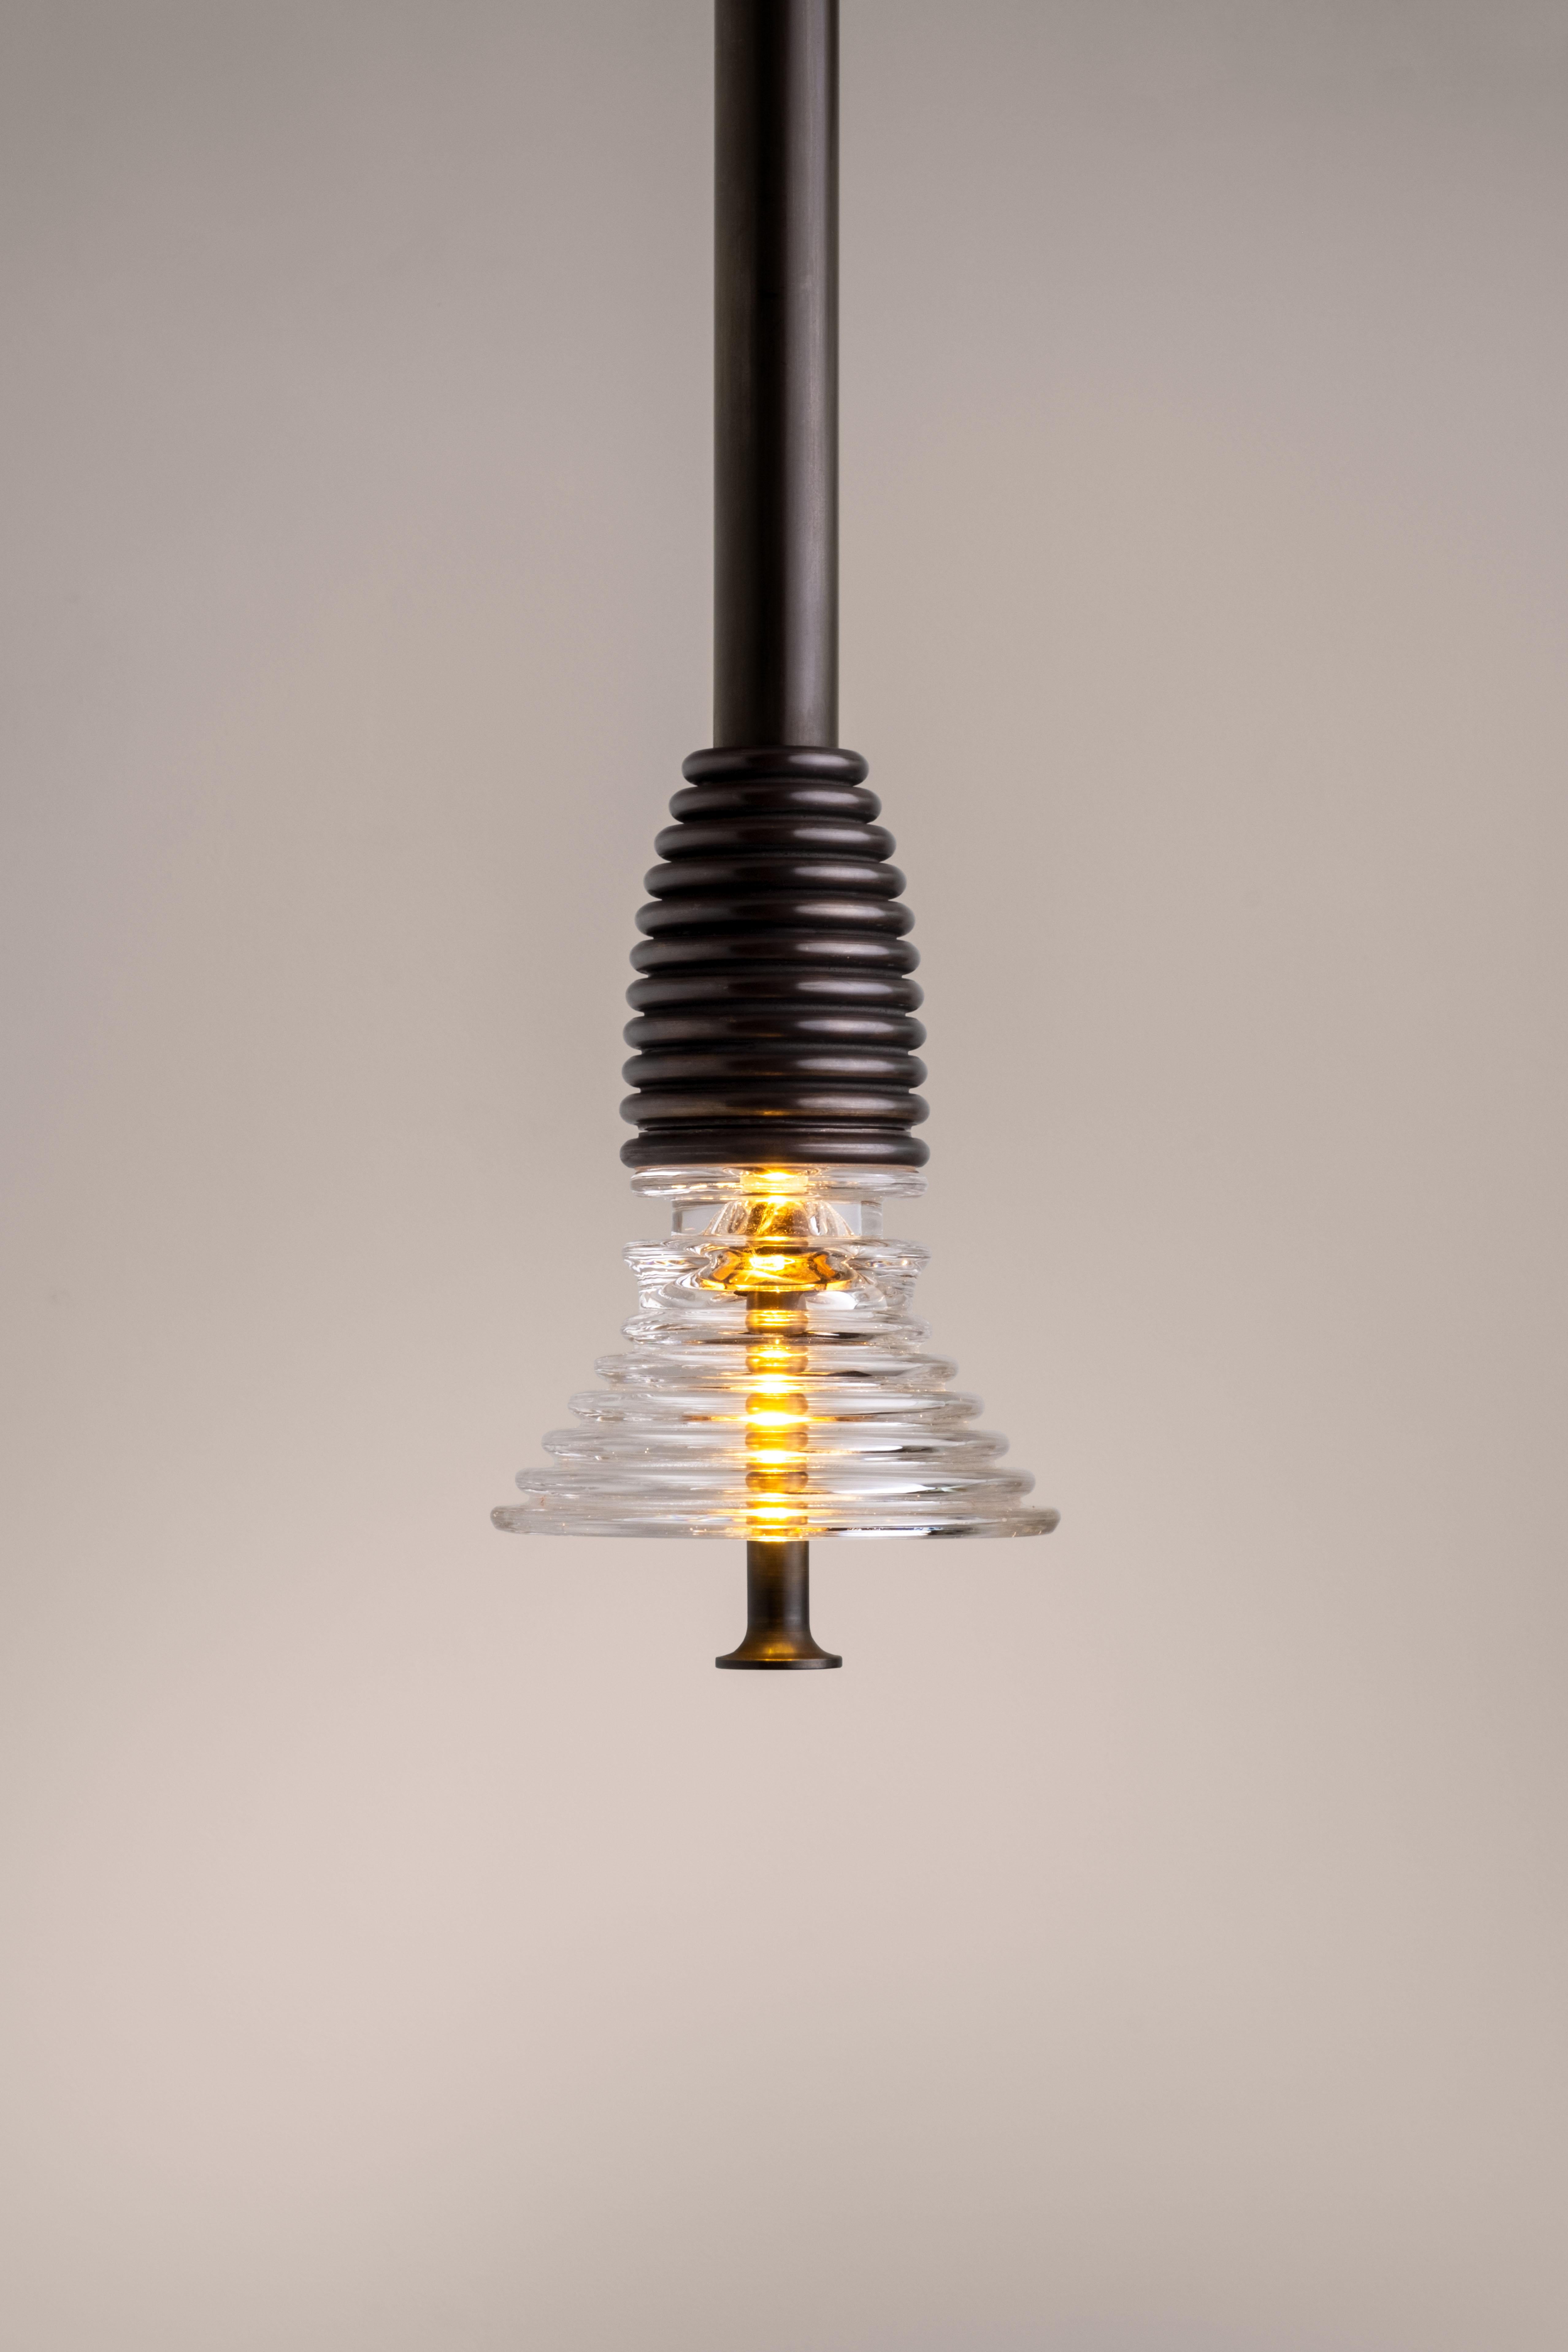 The Insulator 'A' Pendant in dark brass and clear glass by NOVOCASTRIAN deco For Sale 1